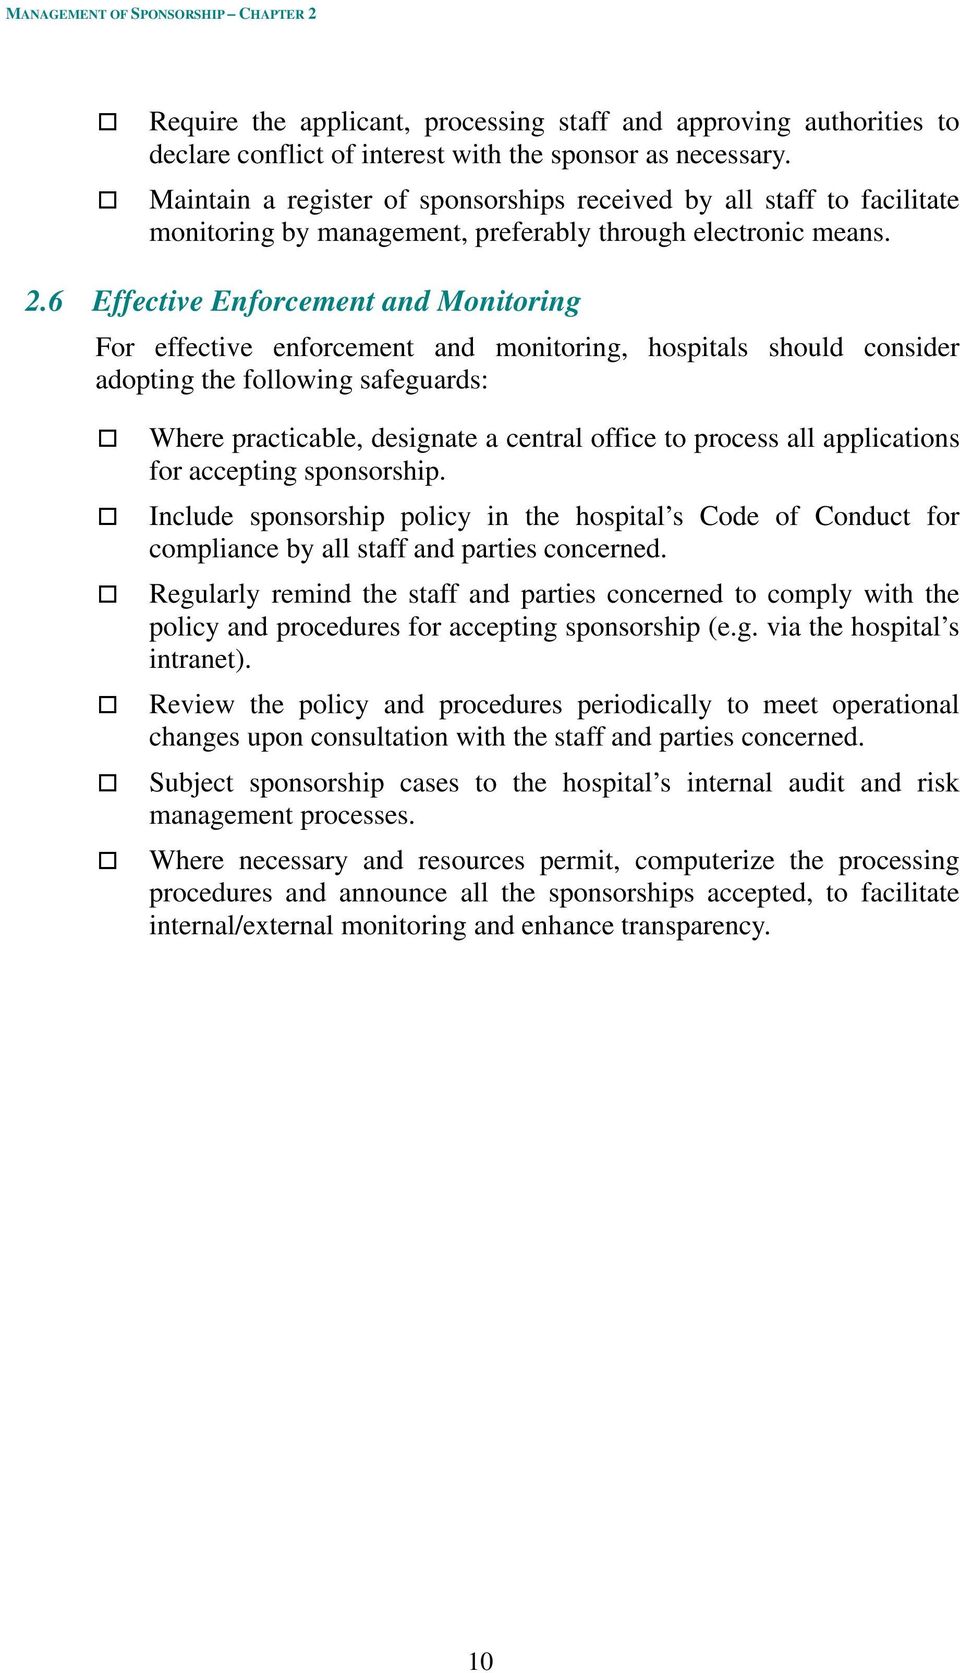 6 Effective Enforcement and Monitoring For effective enforcement and monitoring, hospitals should consider adopting the following safeguards: Where practicable, designate a central office to process